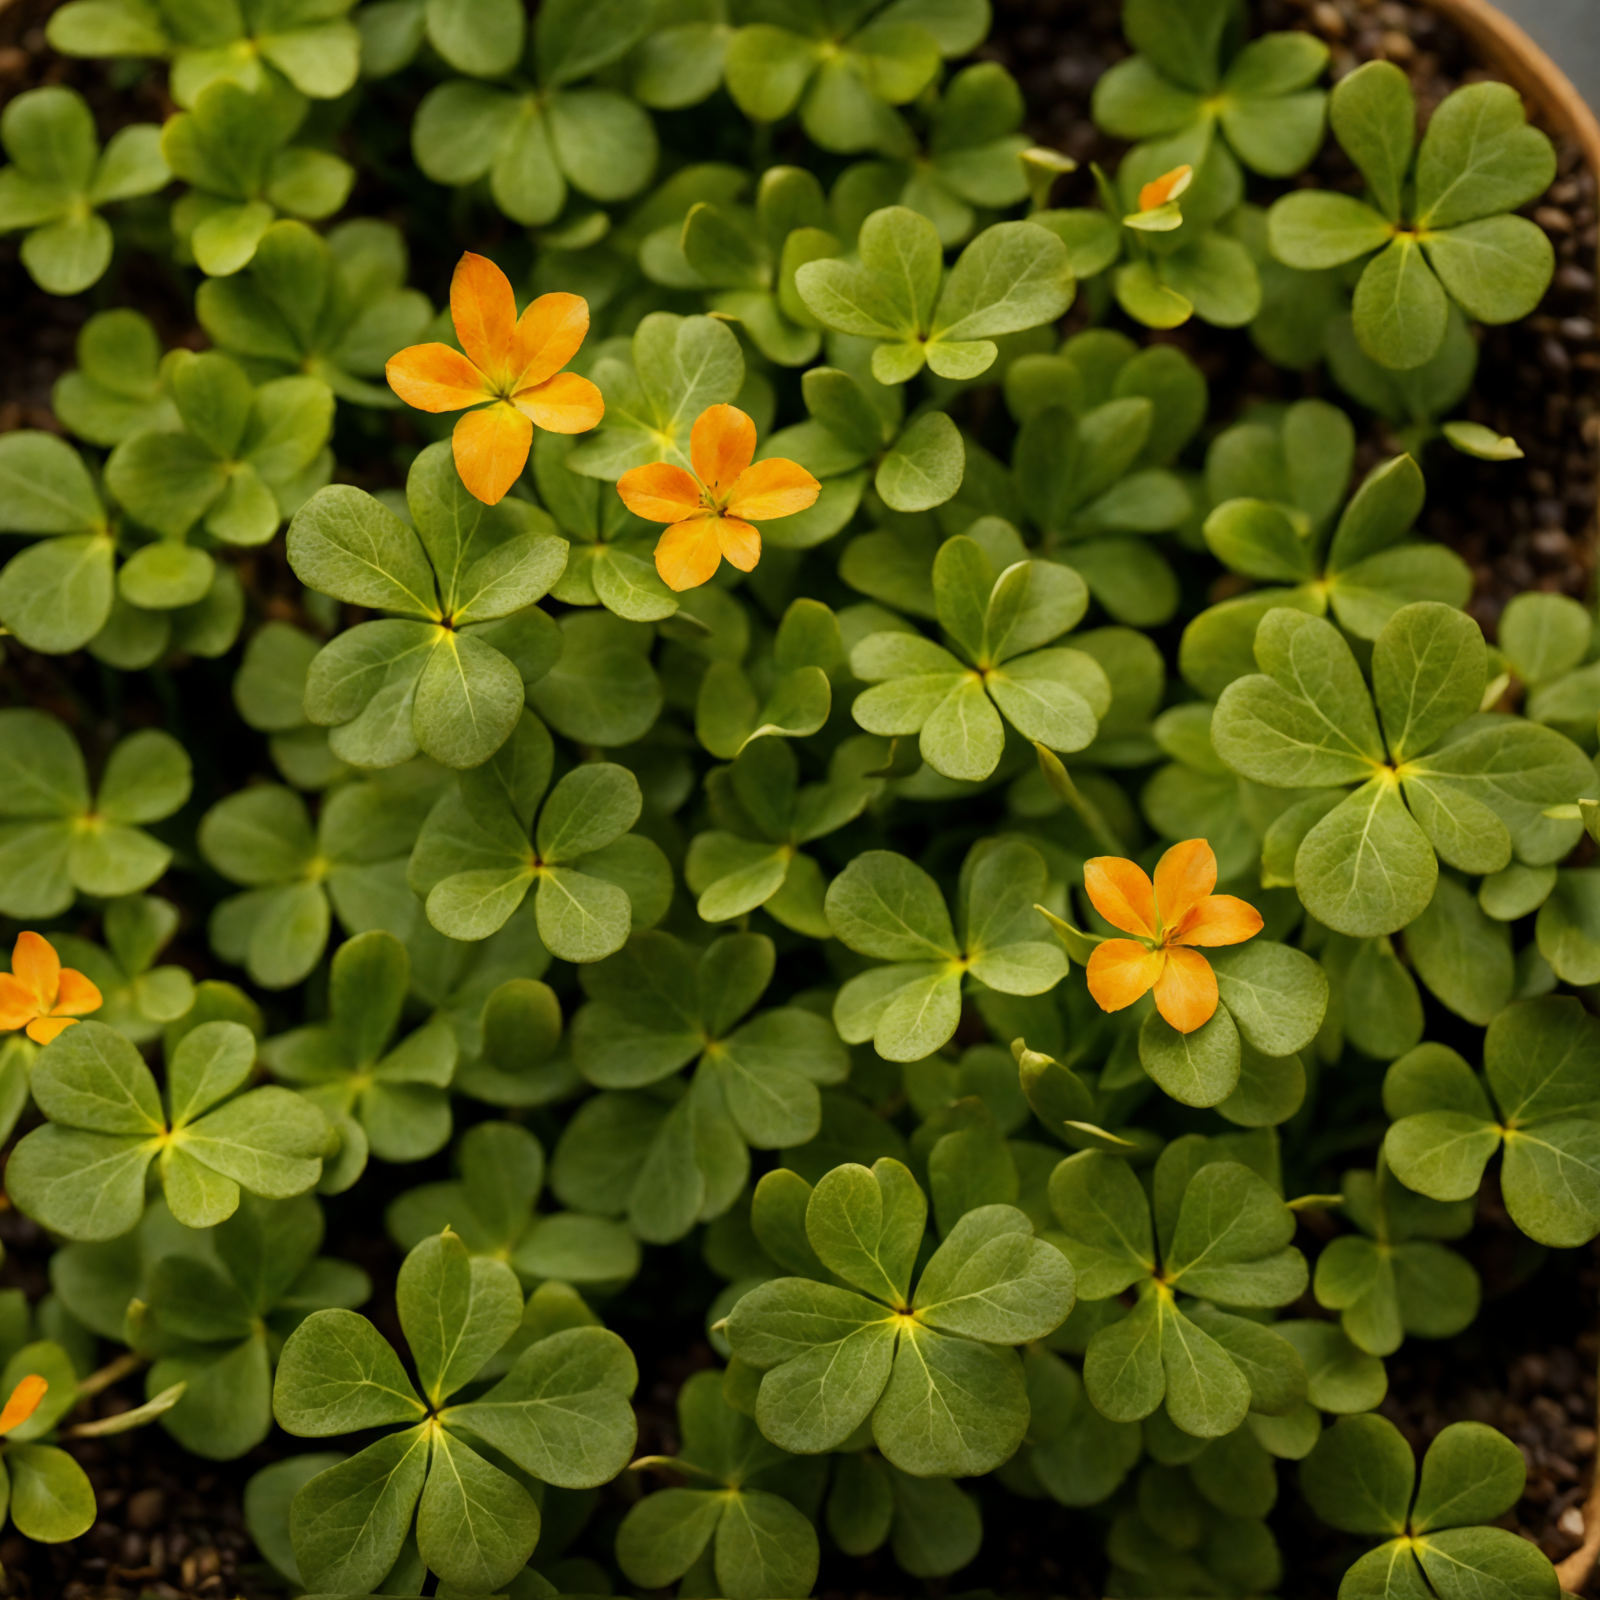 Oxalis corniculata with vibrant yellow flowers and green leaves, indoor setting, clear lighting, dark background.